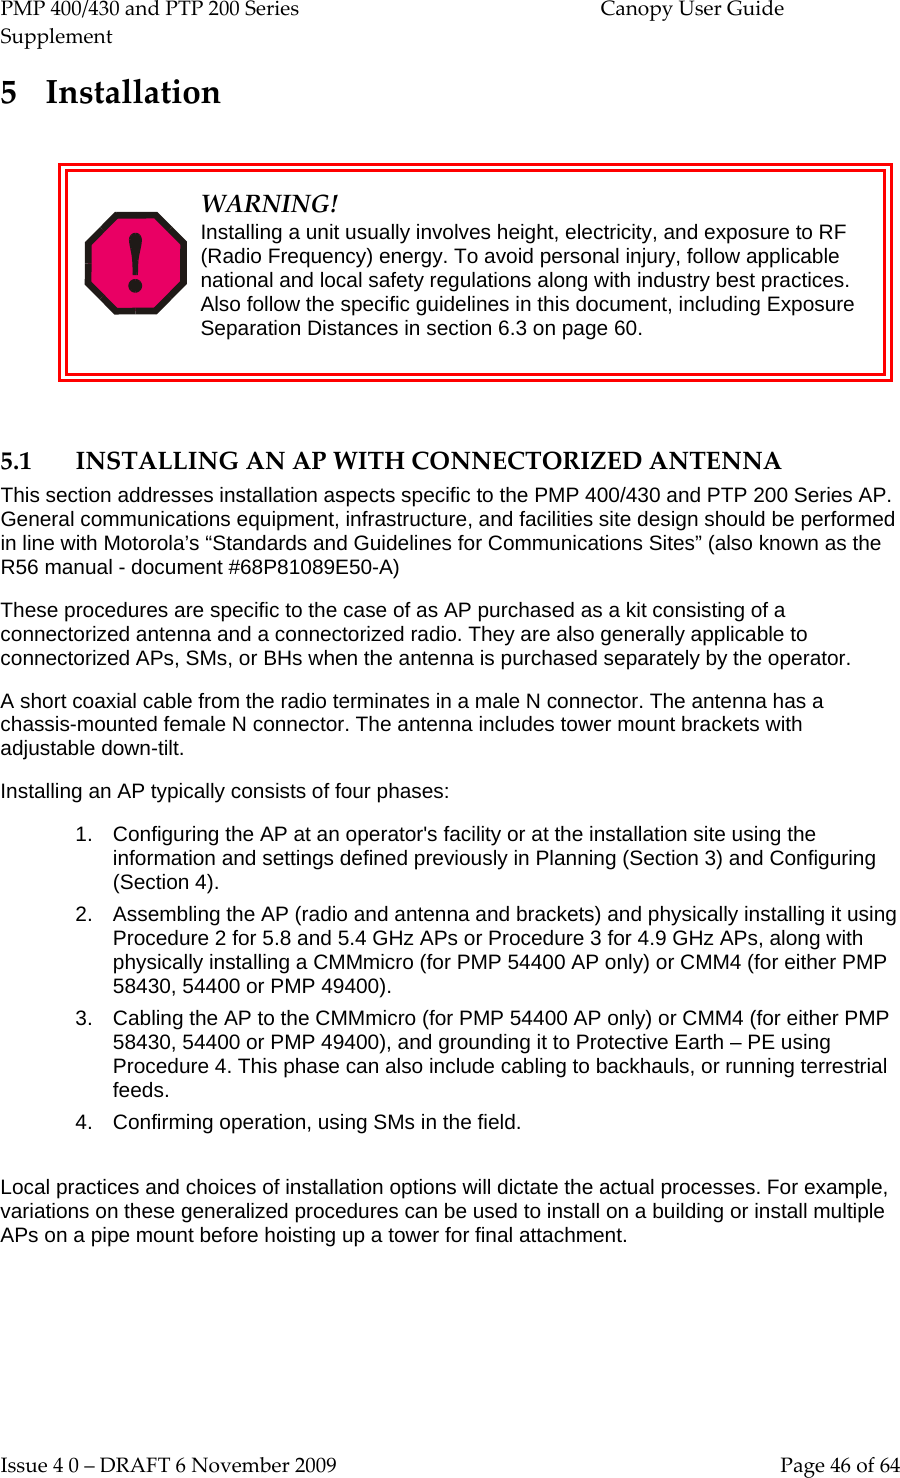 PMP 400/430 and PTP 200 Series  Canopy User Guide Supplement Issue 4 0 – DRAFT 6 November 2009    Page 46 of 64 5 Installation   WARNING! Installing a unit usually involves height, electricity, and exposure to RF (Radio Frequency) energy. To avoid personal injury, follow applicable national and local safety regulations along with industry best practices. Also follow the specific guidelines in this document, including Exposure Separation Distances in section 6.3 on page 60.  5.1 INSTALLING AN AP WITH CONNECTORIZED ANTENNA This section addresses installation aspects specific to the PMP 400/430 and PTP 200 Series AP. General communications equipment, infrastructure, and facilities site design should be performed in line with Motorola’s “Standards and Guidelines for Communications Sites” (also known as the R56 manual - document #68P81089E50-A) These procedures are specific to the case of as AP purchased as a kit consisting of a connectorized antenna and a connectorized radio. They are also generally applicable to connectorized APs, SMs, or BHs when the antenna is purchased separately by the operator. A short coaxial cable from the radio terminates in a male N connector. The antenna has a chassis-mounted female N connector. The antenna includes tower mount brackets with adjustable down-tilt. Installing an AP typically consists of four phases: 1. Configuring the AP at an operator&apos;s facility or at the installation site using the information and settings defined previously in Planning (Section 3) and Configuring (Section 4). 2. Assembling the AP (radio and antenna and brackets) and physically installing it using Procedure 2 for 5.8 and 5.4 GHz APs or Procedure 3 for 4.9 GHz APs, along with physically installing a CMMmicro (for PMP 54400 AP only) or CMM4 (for either PMP 58430, 54400 or PMP 49400). 3. Cabling the AP to the CMMmicro (for PMP 54400 AP only) or CMM4 (for either PMP 58430, 54400 or PMP 49400), and grounding it to Protective Earth – PE using Procedure 4. This phase can also include cabling to backhauls, or running terrestrial feeds. 4. Confirming operation, using SMs in the field.  Local practices and choices of installation options will dictate the actual processes. For example, variations on these generalized procedures can be used to install on a building or install multiple APs on a pipe mount before hoisting up a tower for final attachment.  